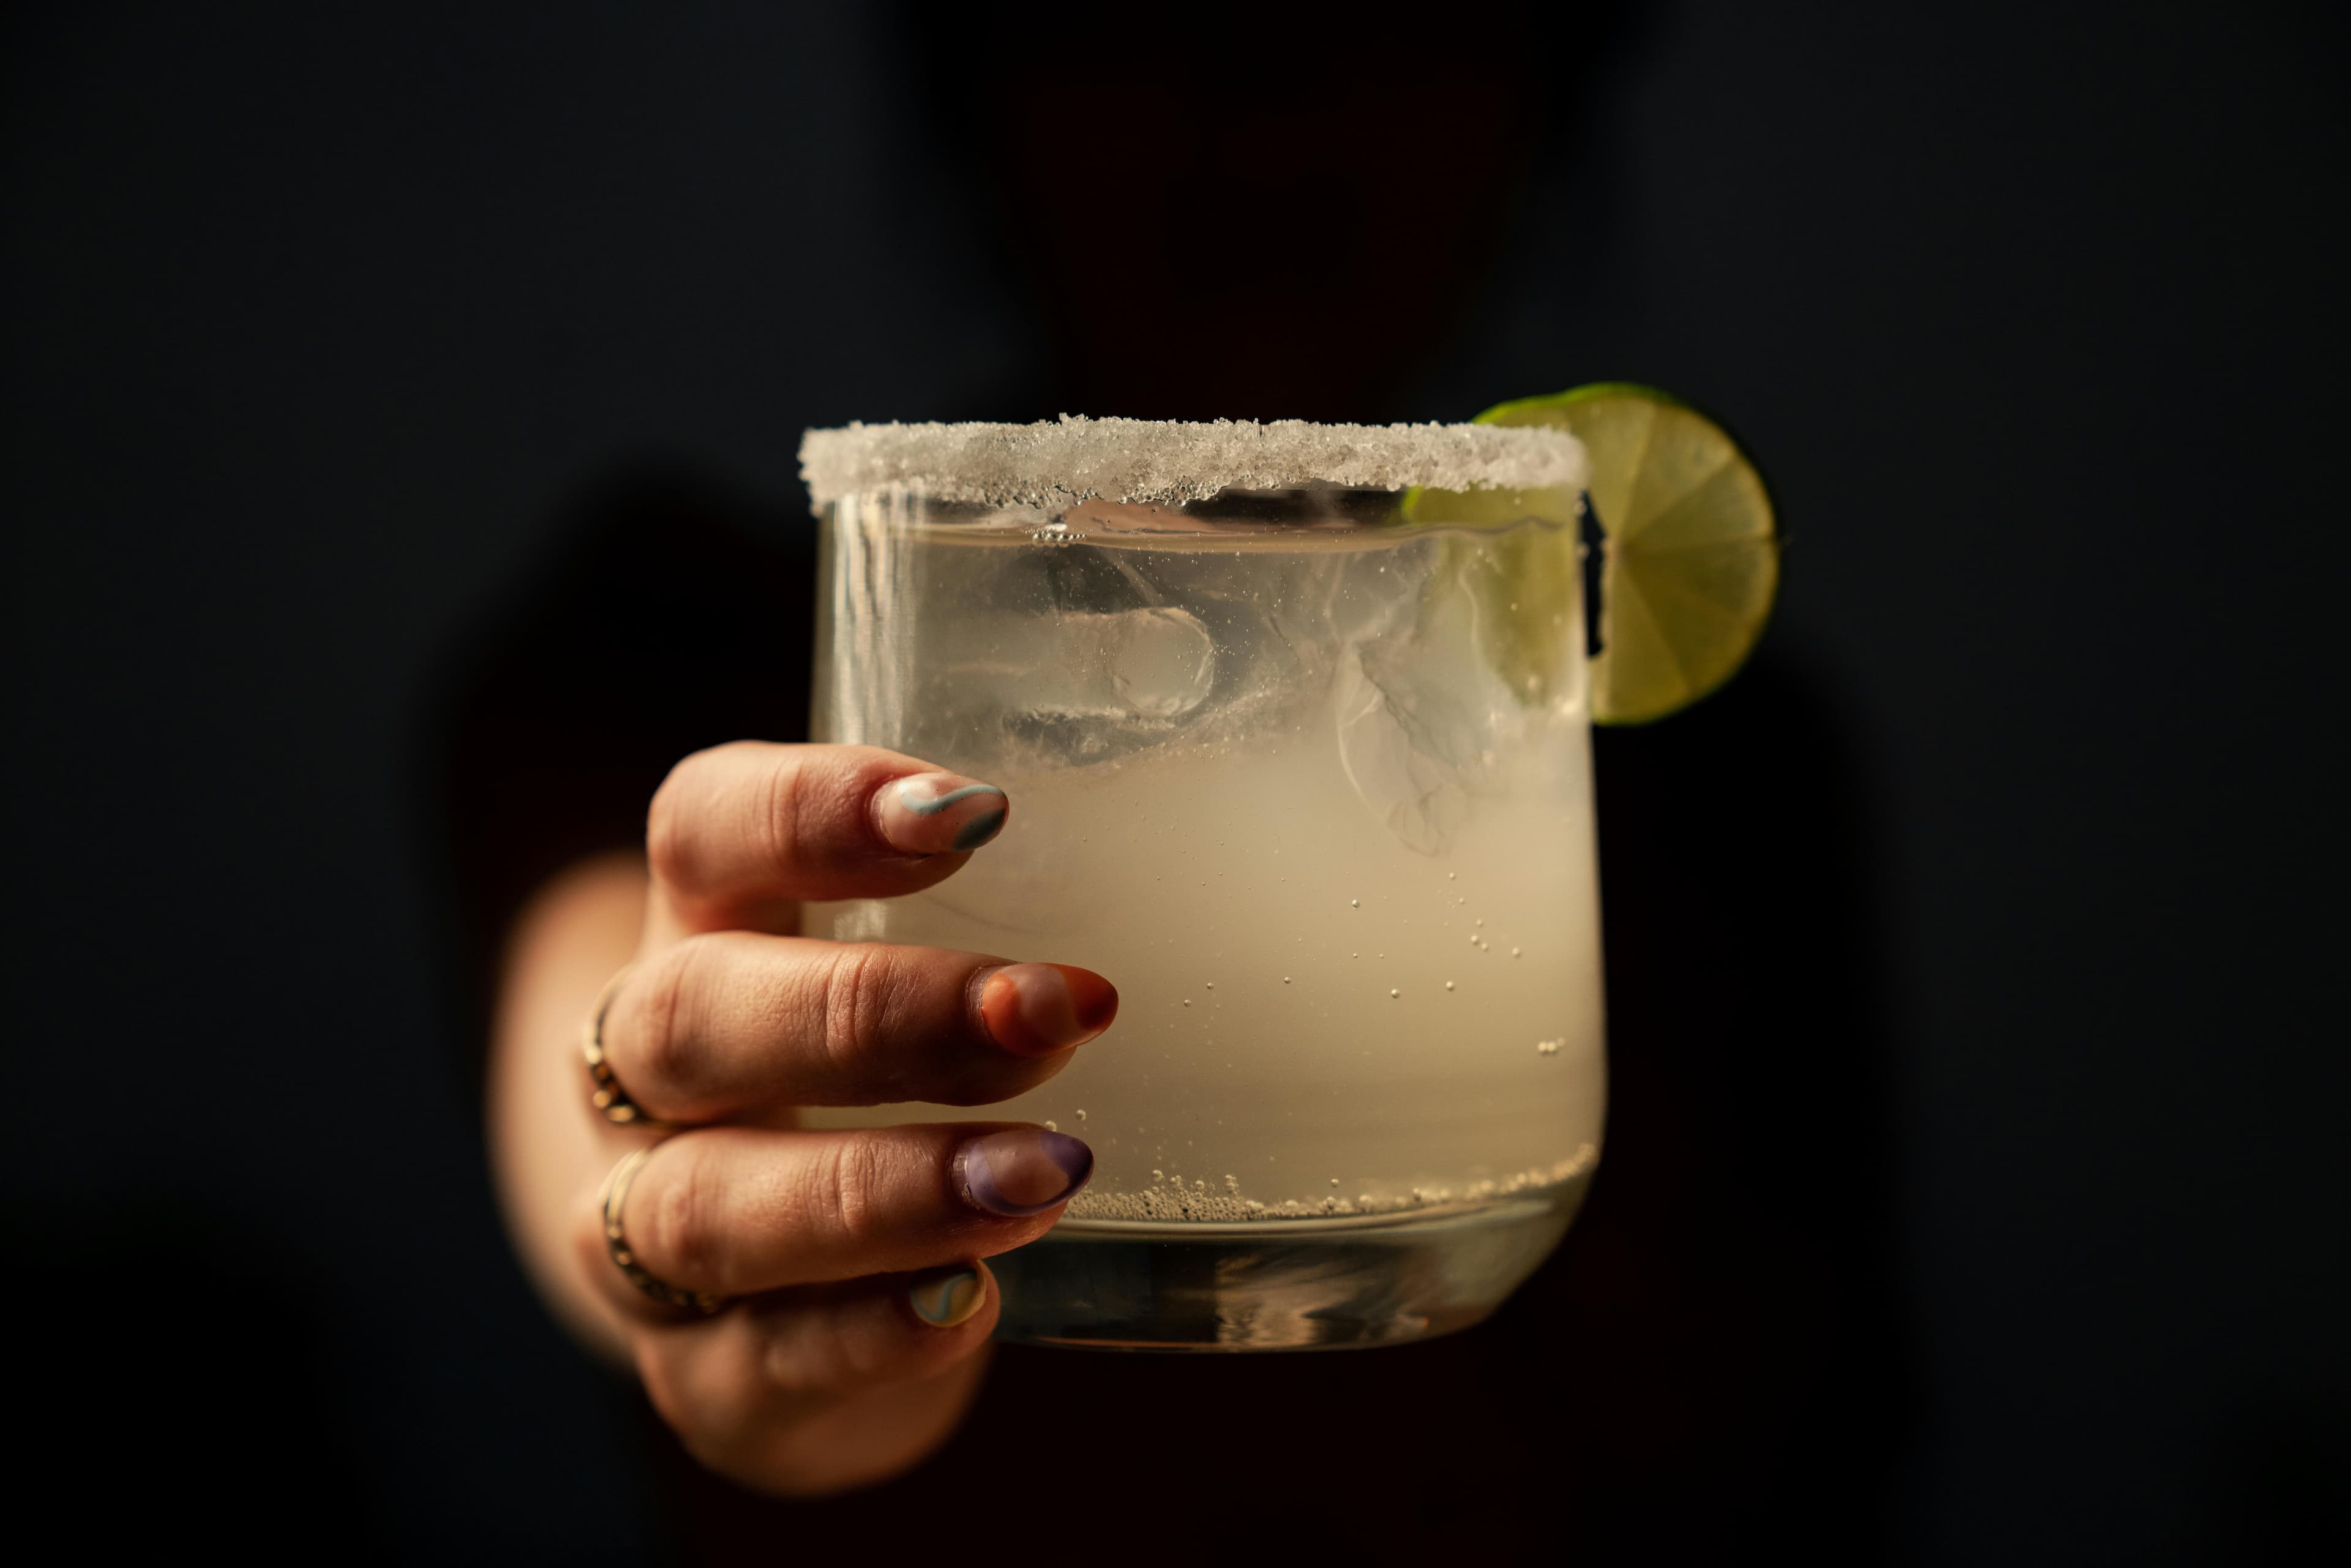 To Salt or Not To Salt The Margarita Rim? Bonus: Expert Tips On How To Achieve It Perfectly 